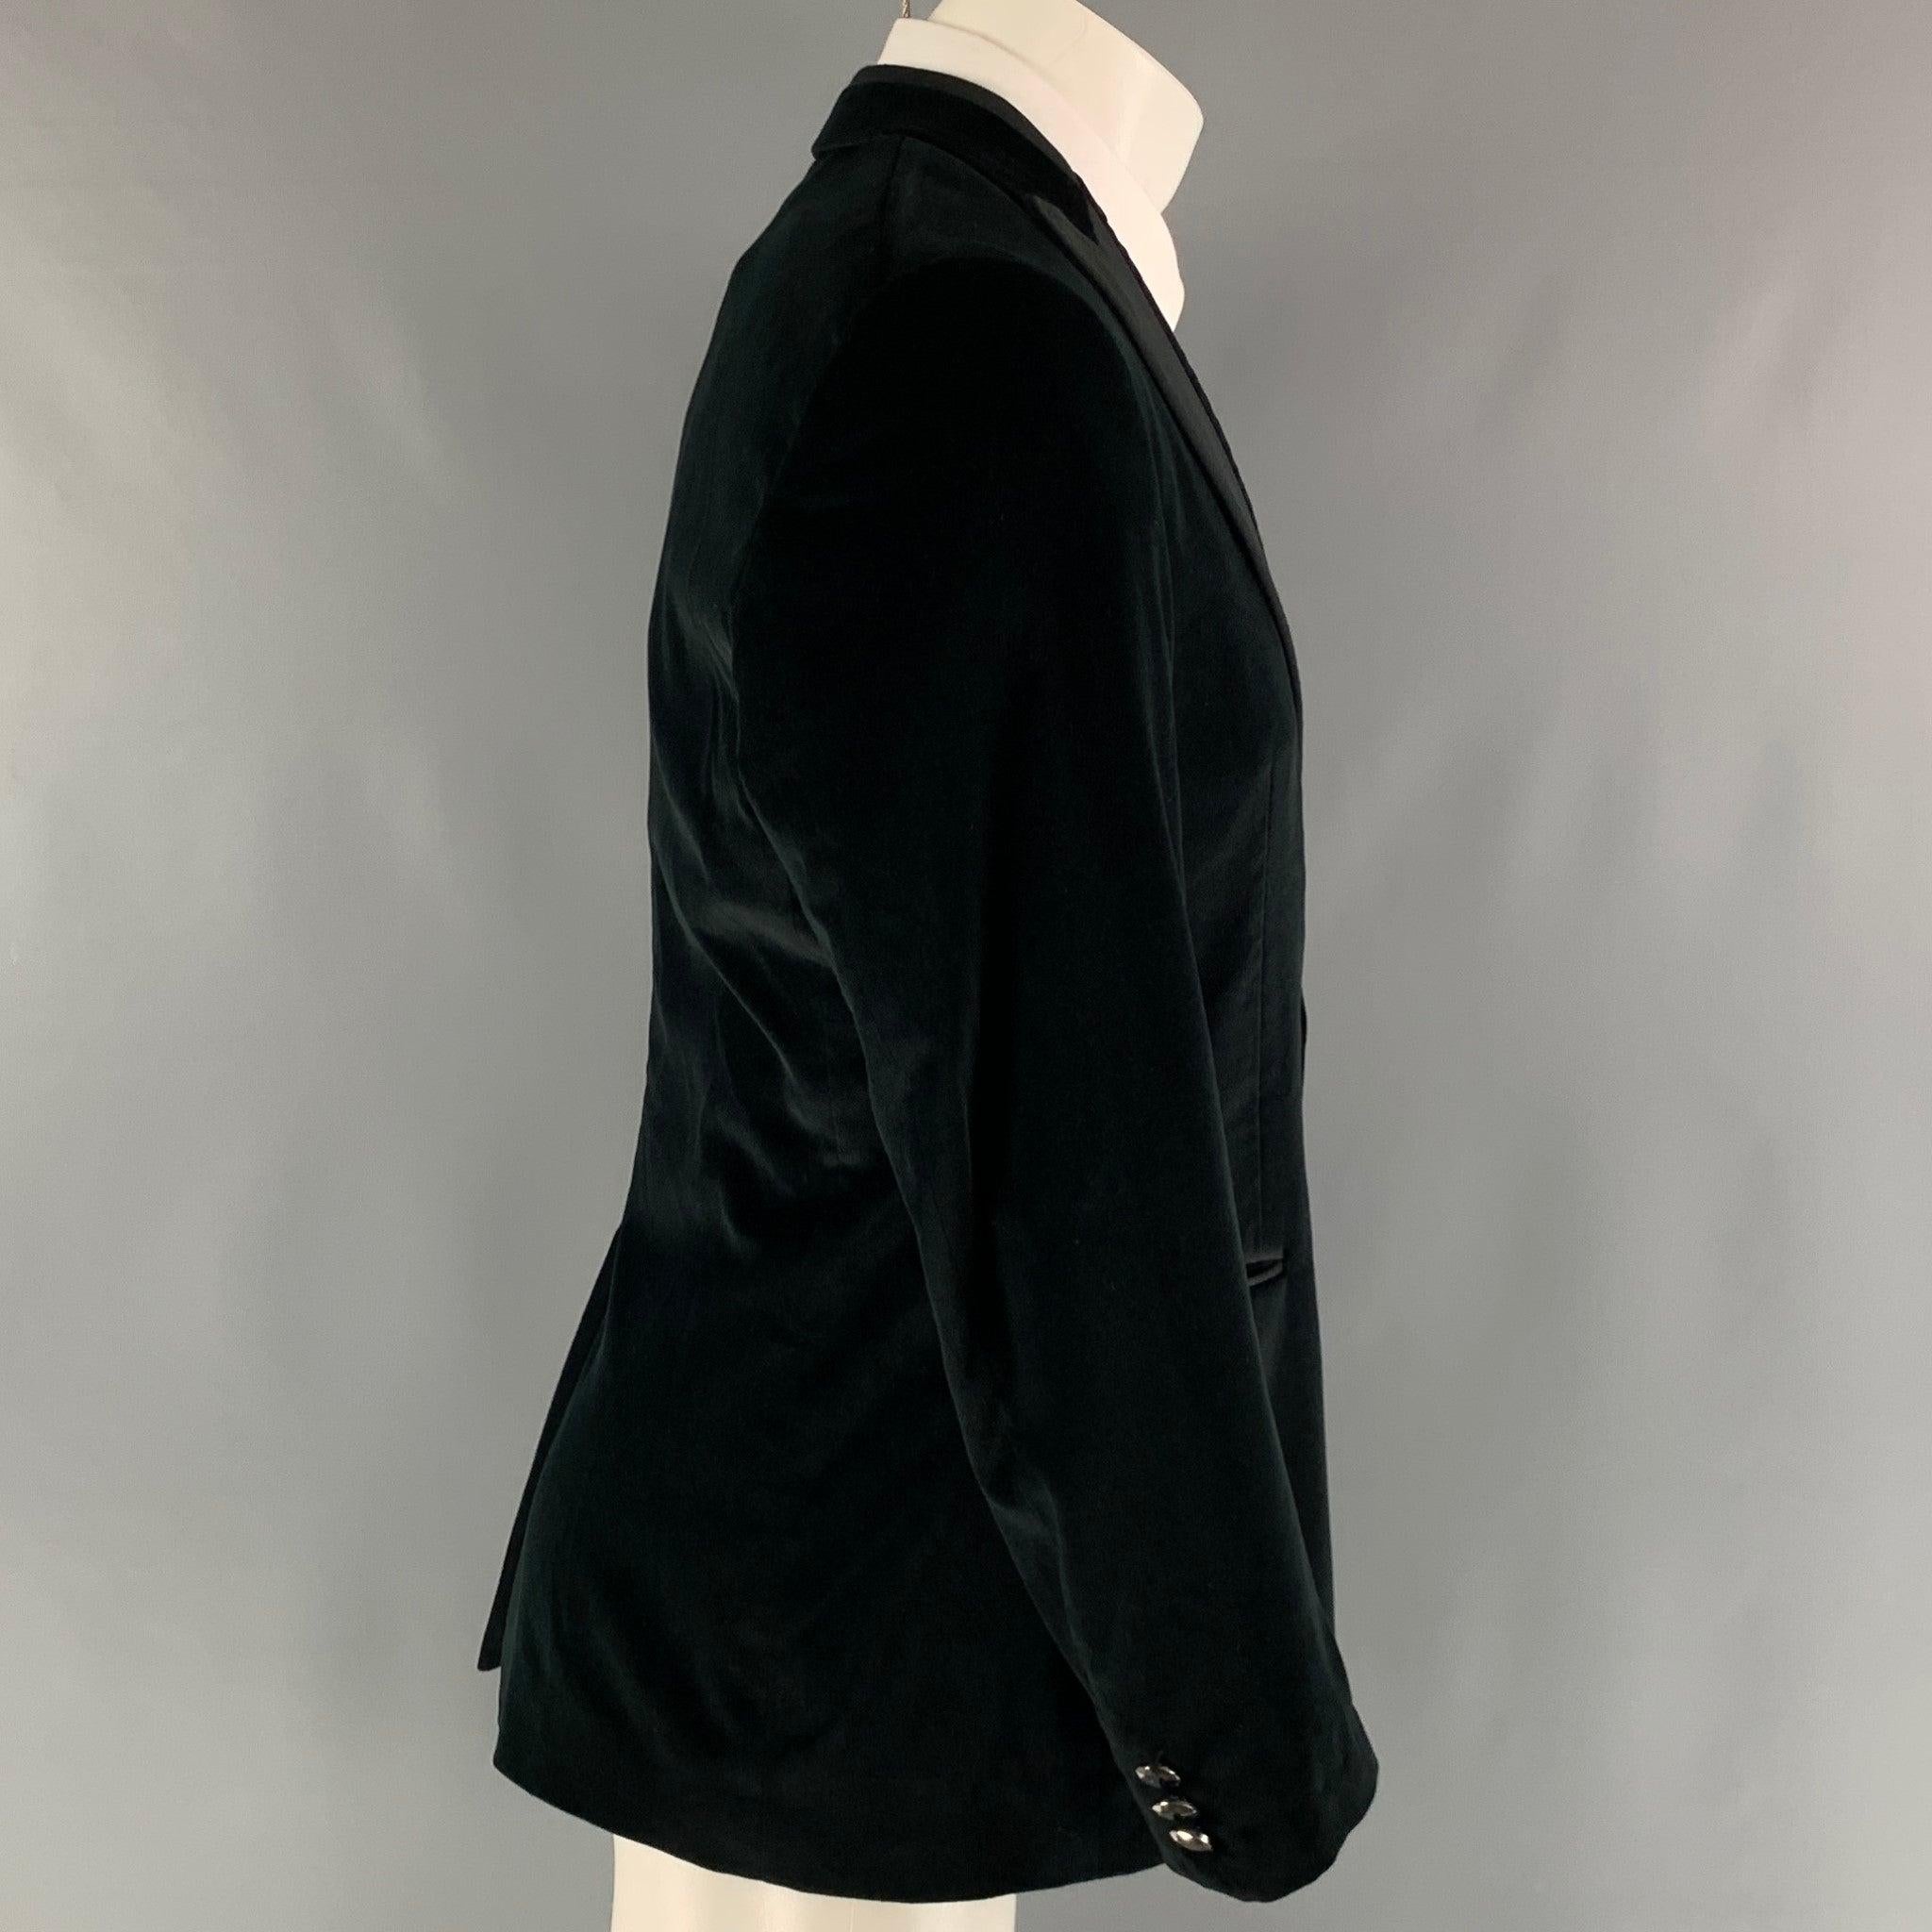 ETRO sport coat comes in black cotton velvet material featuring a peak lapel, single breasted, two button front, and a single back vent. Made in Italy.Excellent Pre-Owned Condition.  

Marked:   IT 50 

Measurements: 
 
Shoulder: 17.5 inches Chest: